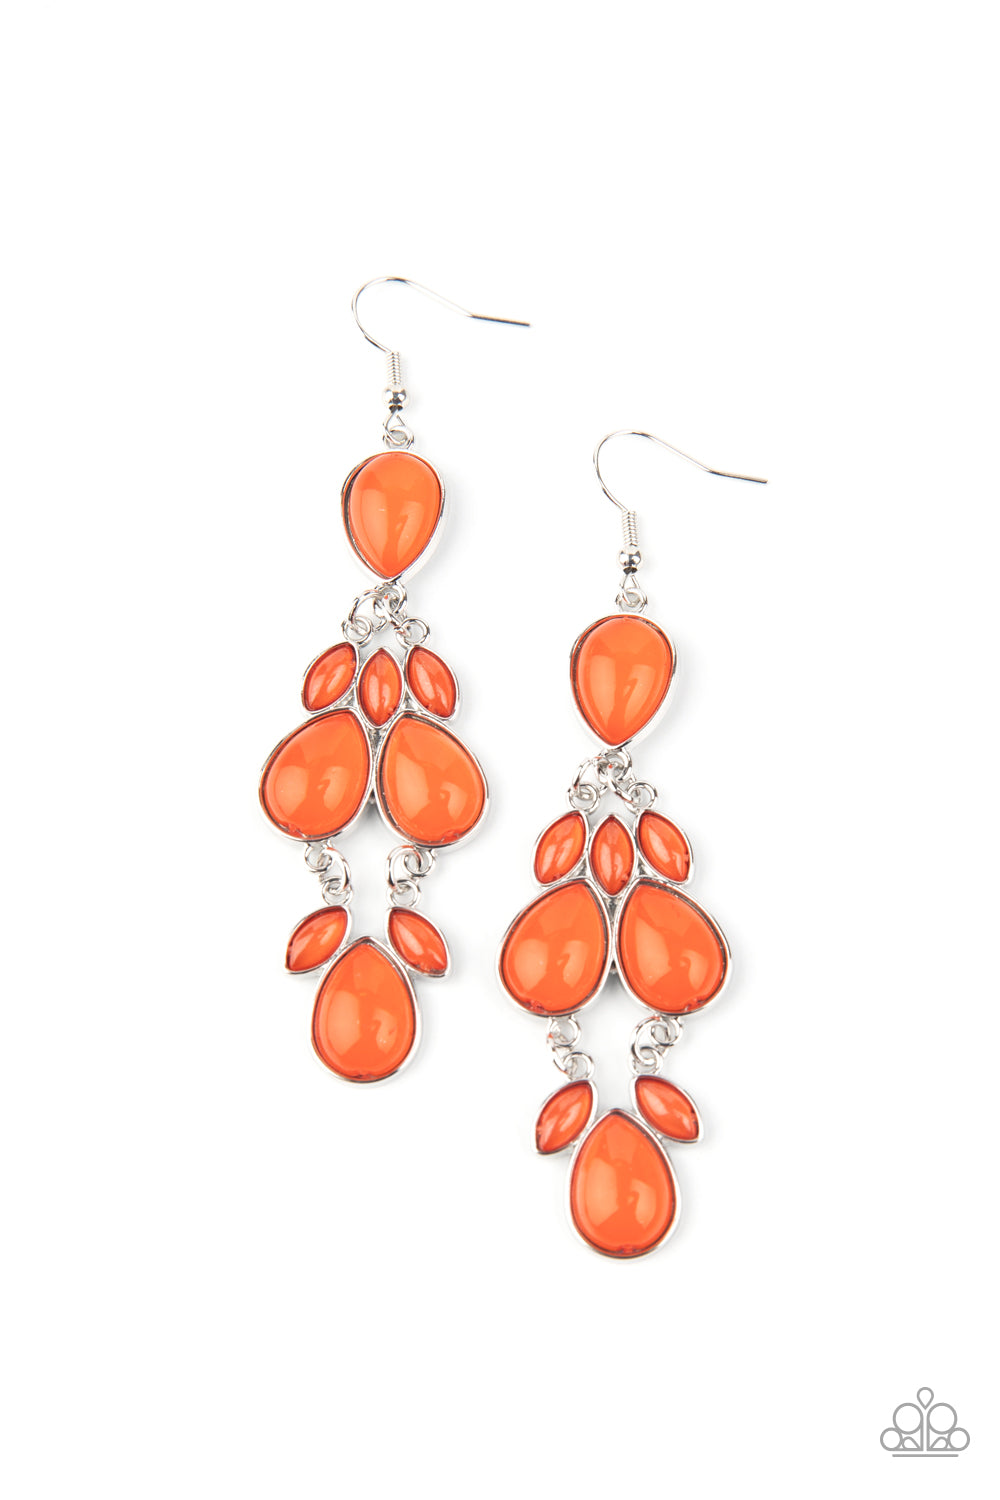 &lt;P&gt;Encased in sleek silver fittings, a glassy collection of marquise and teardrop Amberglow beads delicately connect into a dramatically colorful lure. Earring attaches to a standard fishhook fitting.
&lt;/P&gt;  

&lt;P&gt; &lt;I&gt;  Sold as one pair of earrings. &lt;/I&gt;  &lt;/P&gt;


&lt;img src=\&quot;https://d9b54x484lq62.cloudfront.net/paparazzi/shopping/images/517_tag150x115_1.png\&quot; alt=\&quot;New Kit\&quot; align=\&quot;middle\&quot; height=\&quot;50\&quot; width=\&quot;50\&quot;/&gt;